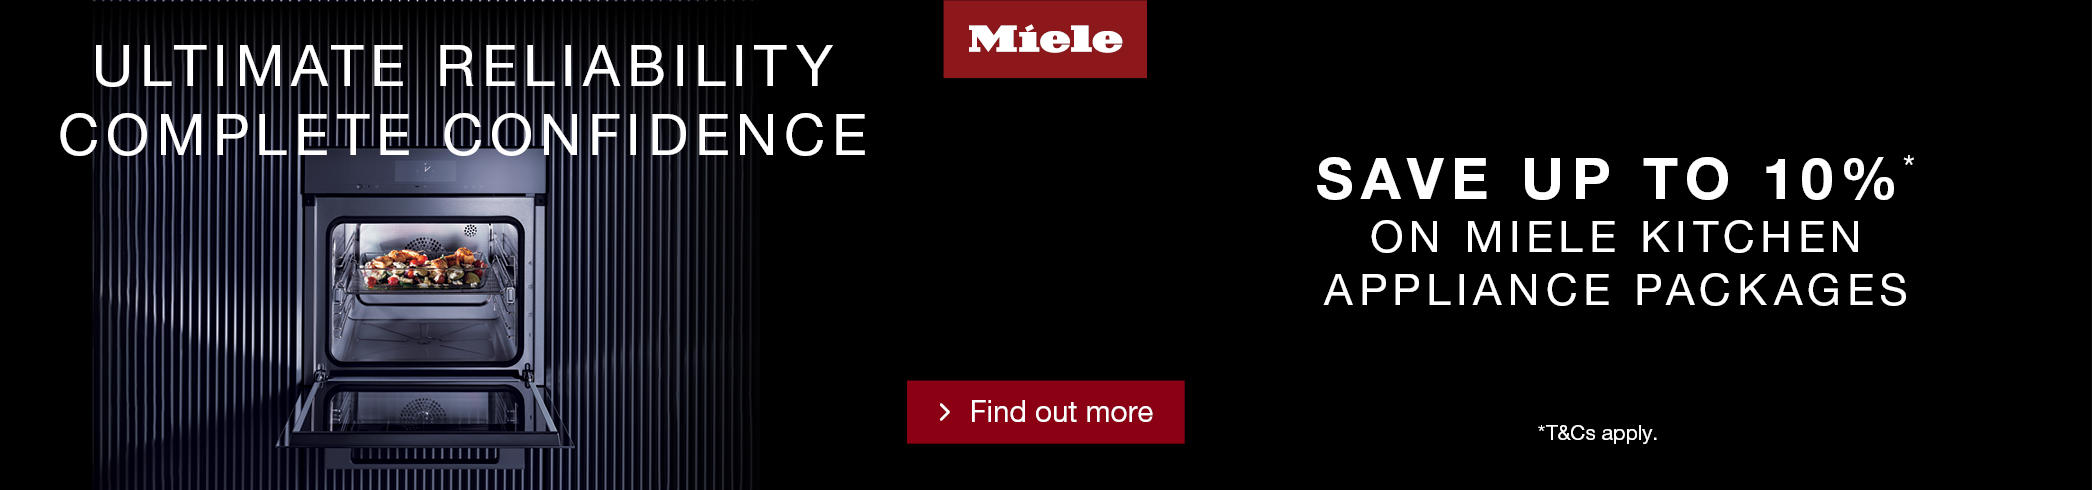 Save up to 10% on Miele Kitchen Appliance Packages